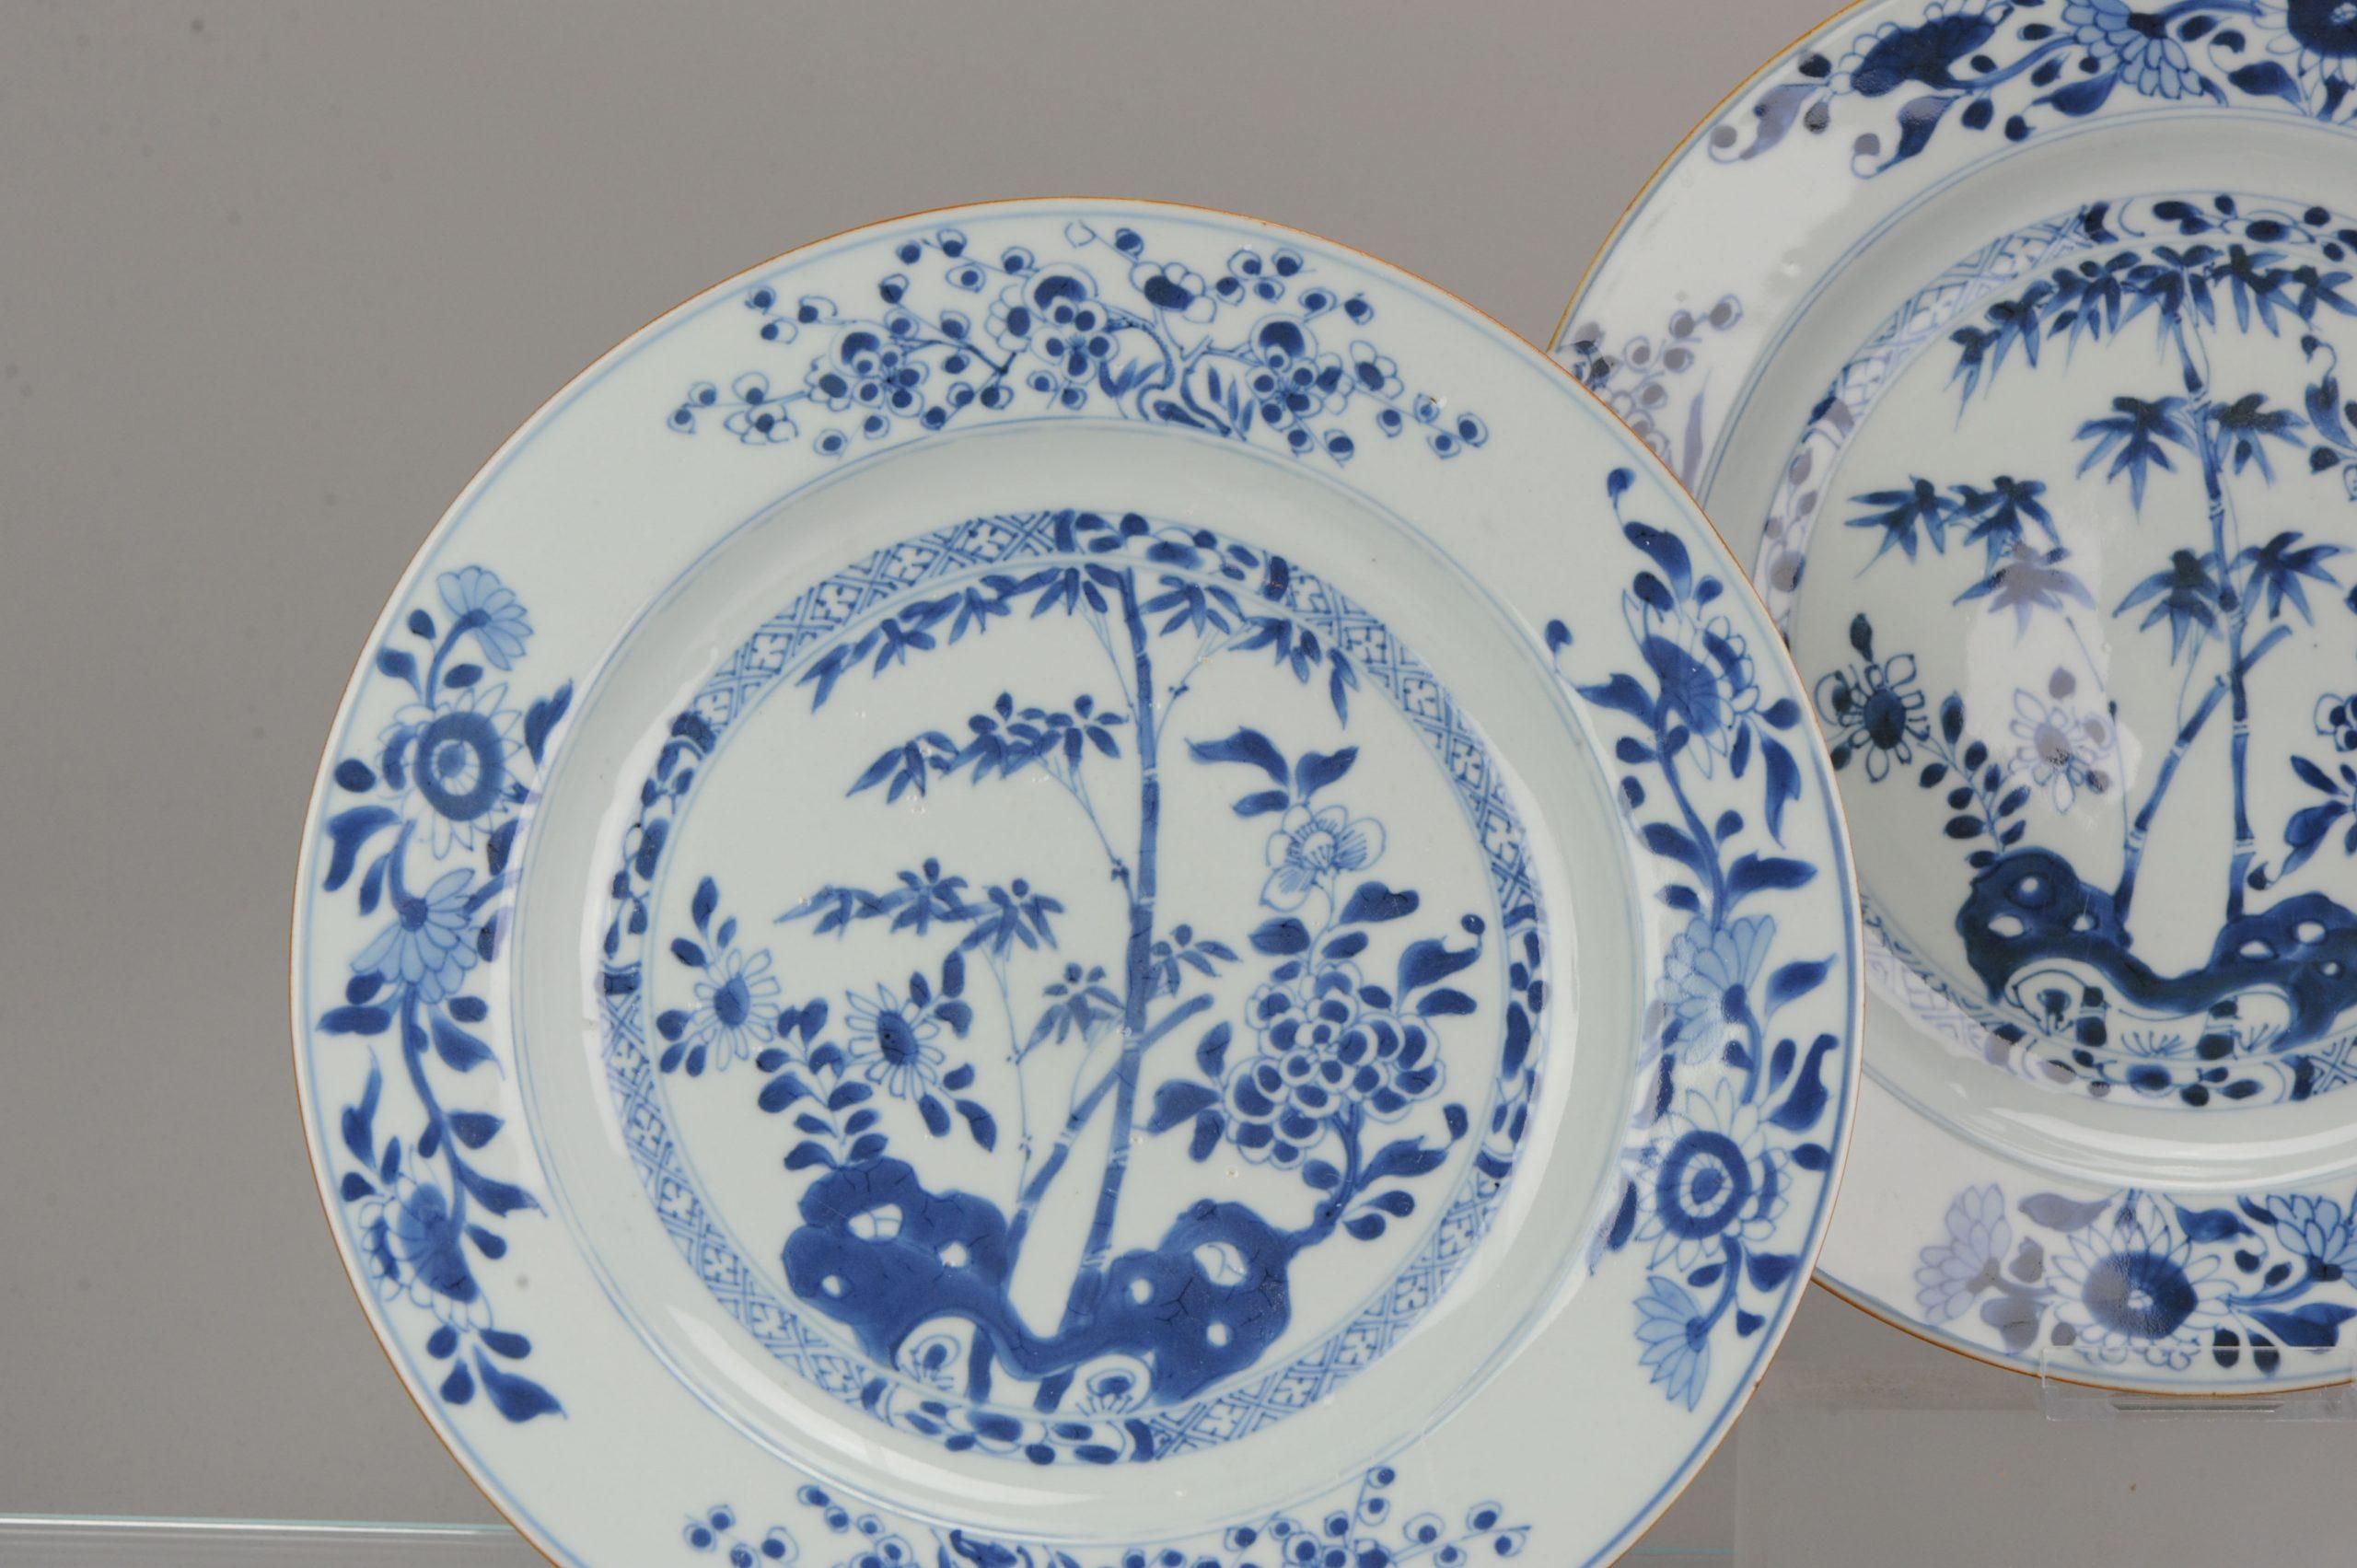 Large Antique Chinese Porcelain 18th C Kangxi Period Blue White Dinner Plates 1